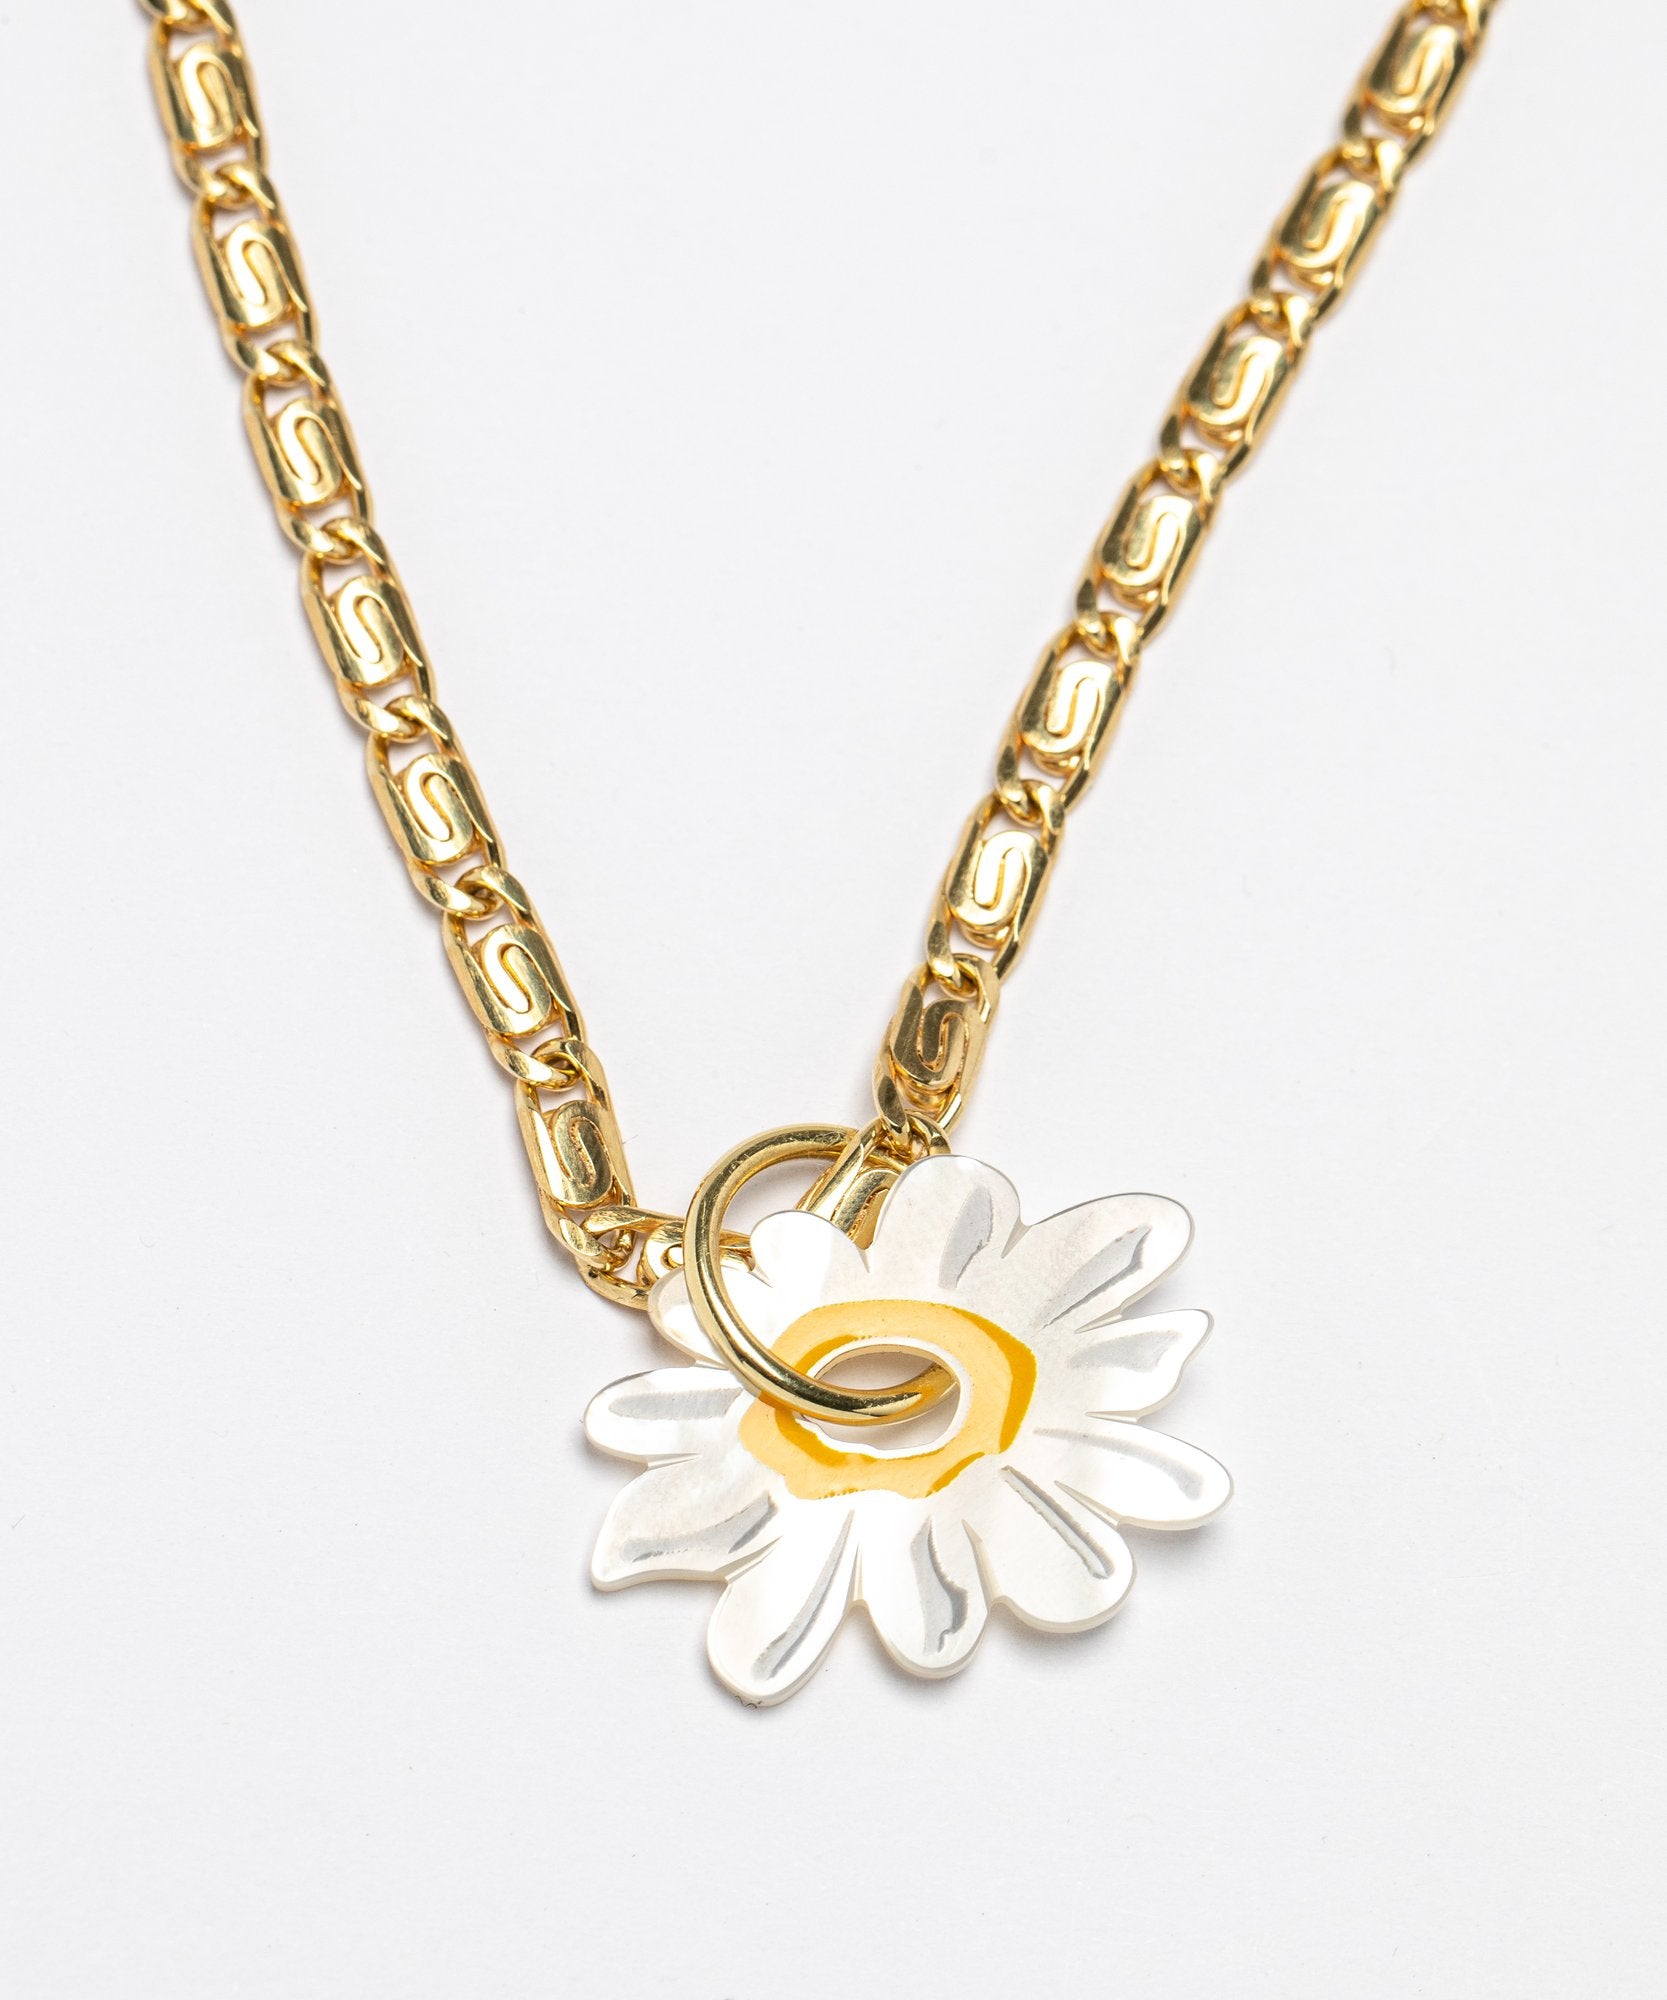 Daisy Just A Friend Necklace - Babs The Label